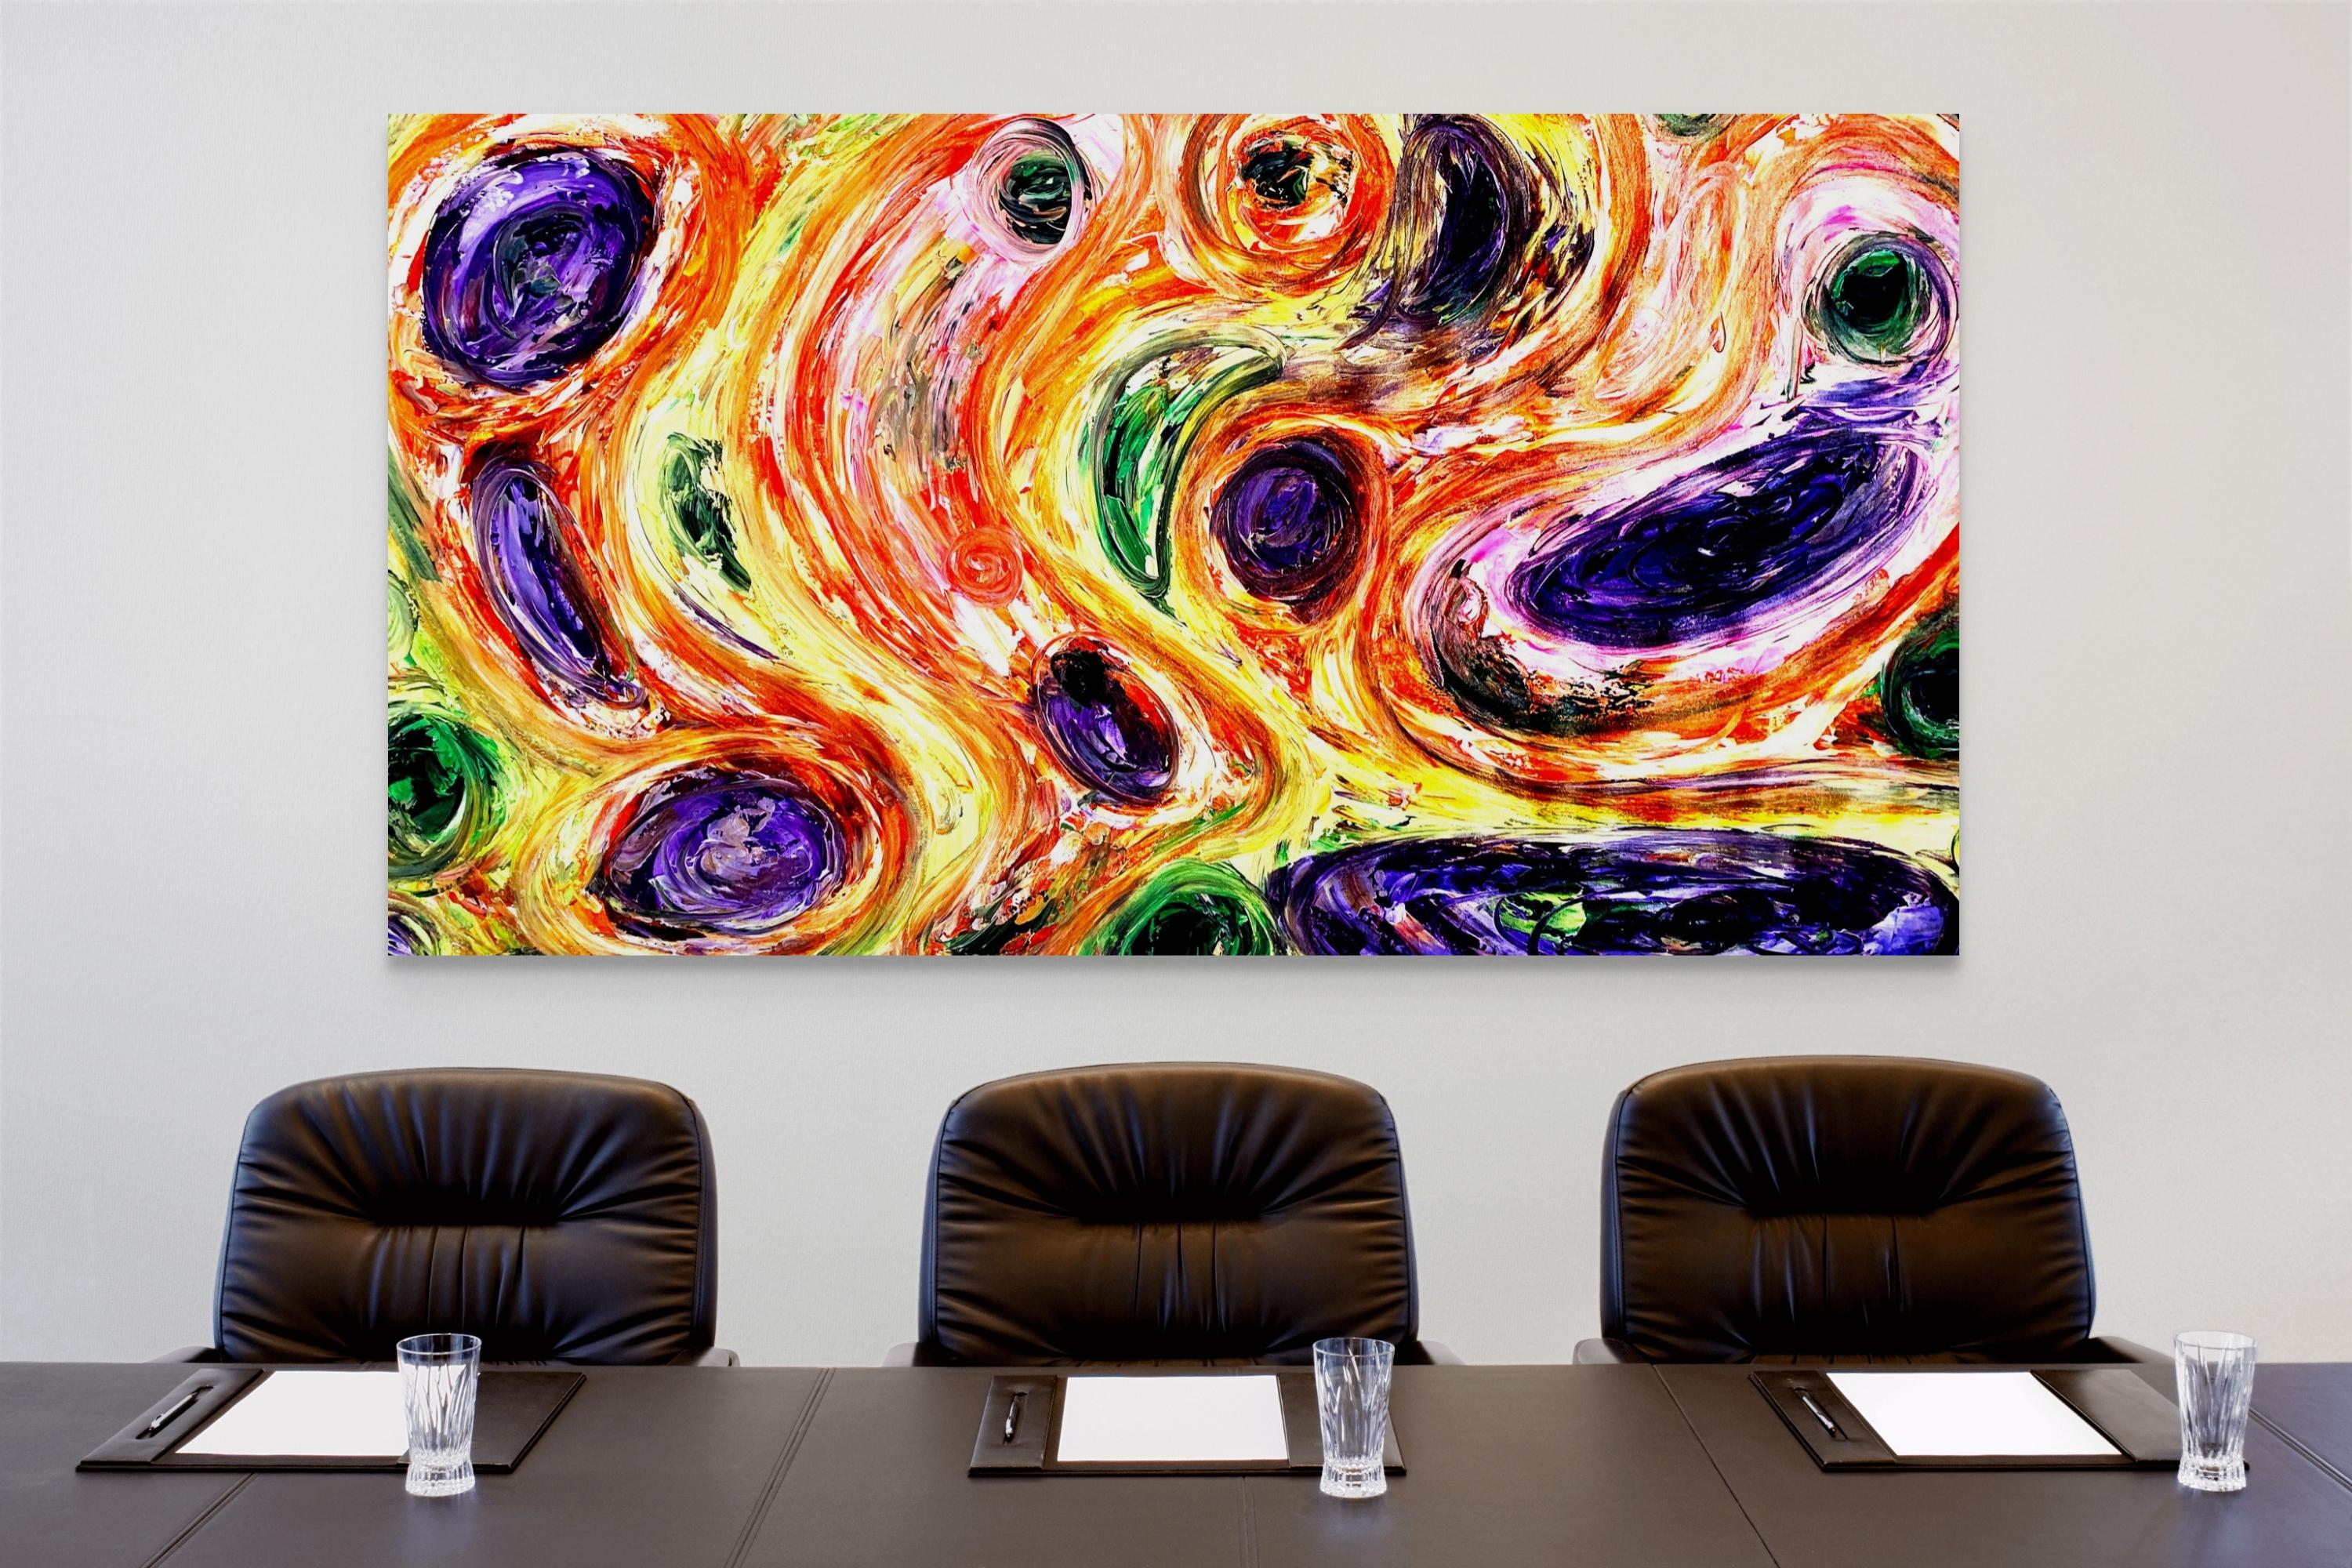 Cells within Cells - Abstract Expressionist Painting by Estelle Asmodelle